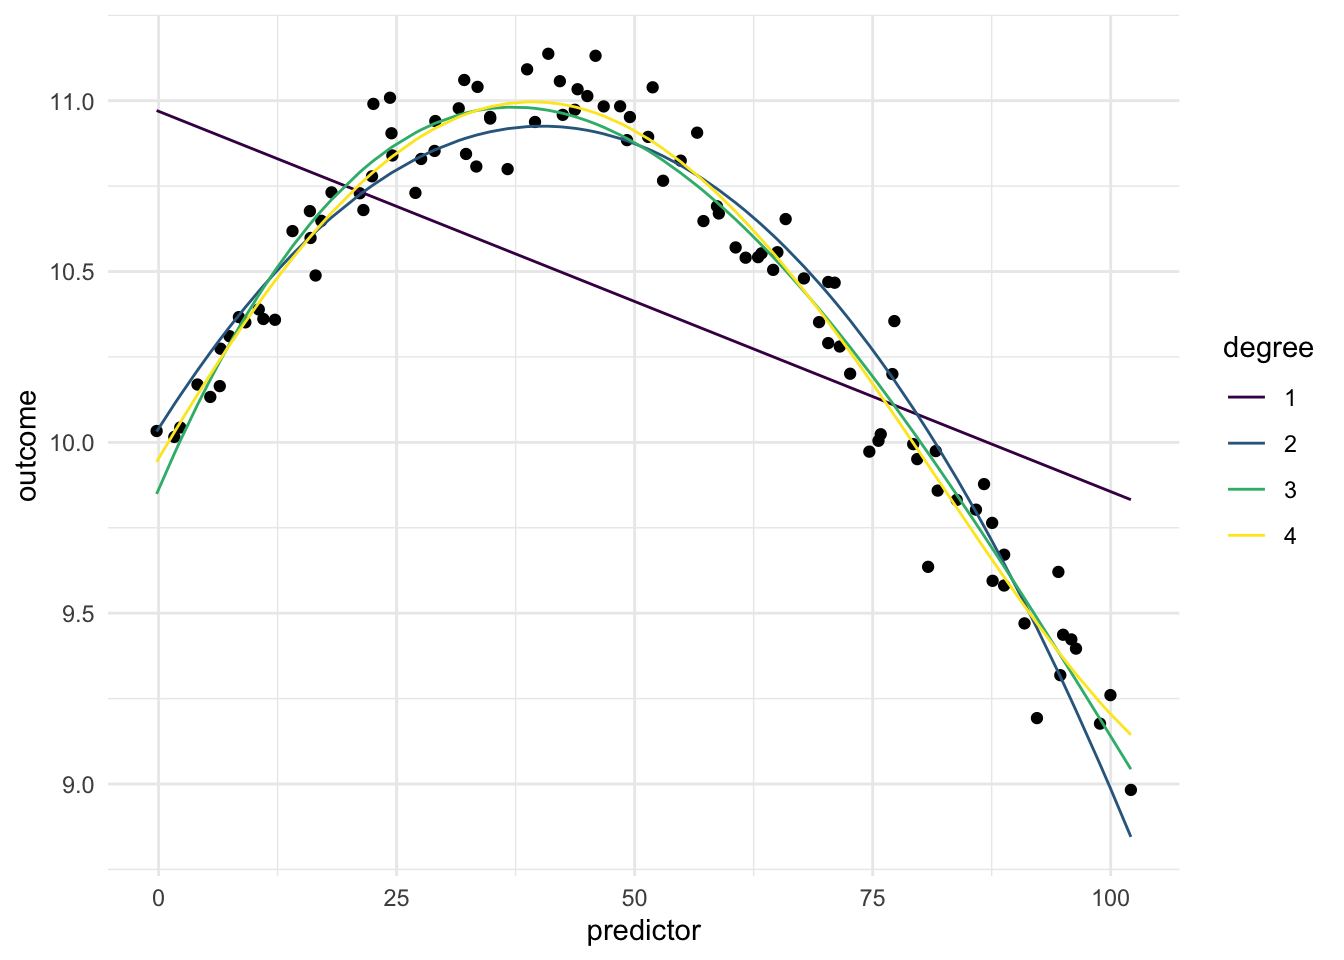 Scatter chart. Predictor along the x-axis and outcome along the y-axis. The data has some wiggliness to it, but it follows a curve. You would not be able to fit a straight line to this data. 4 polynomial curves are plotted to fit the data. The first degree polynomial doesn't fit the data, the other ones do.